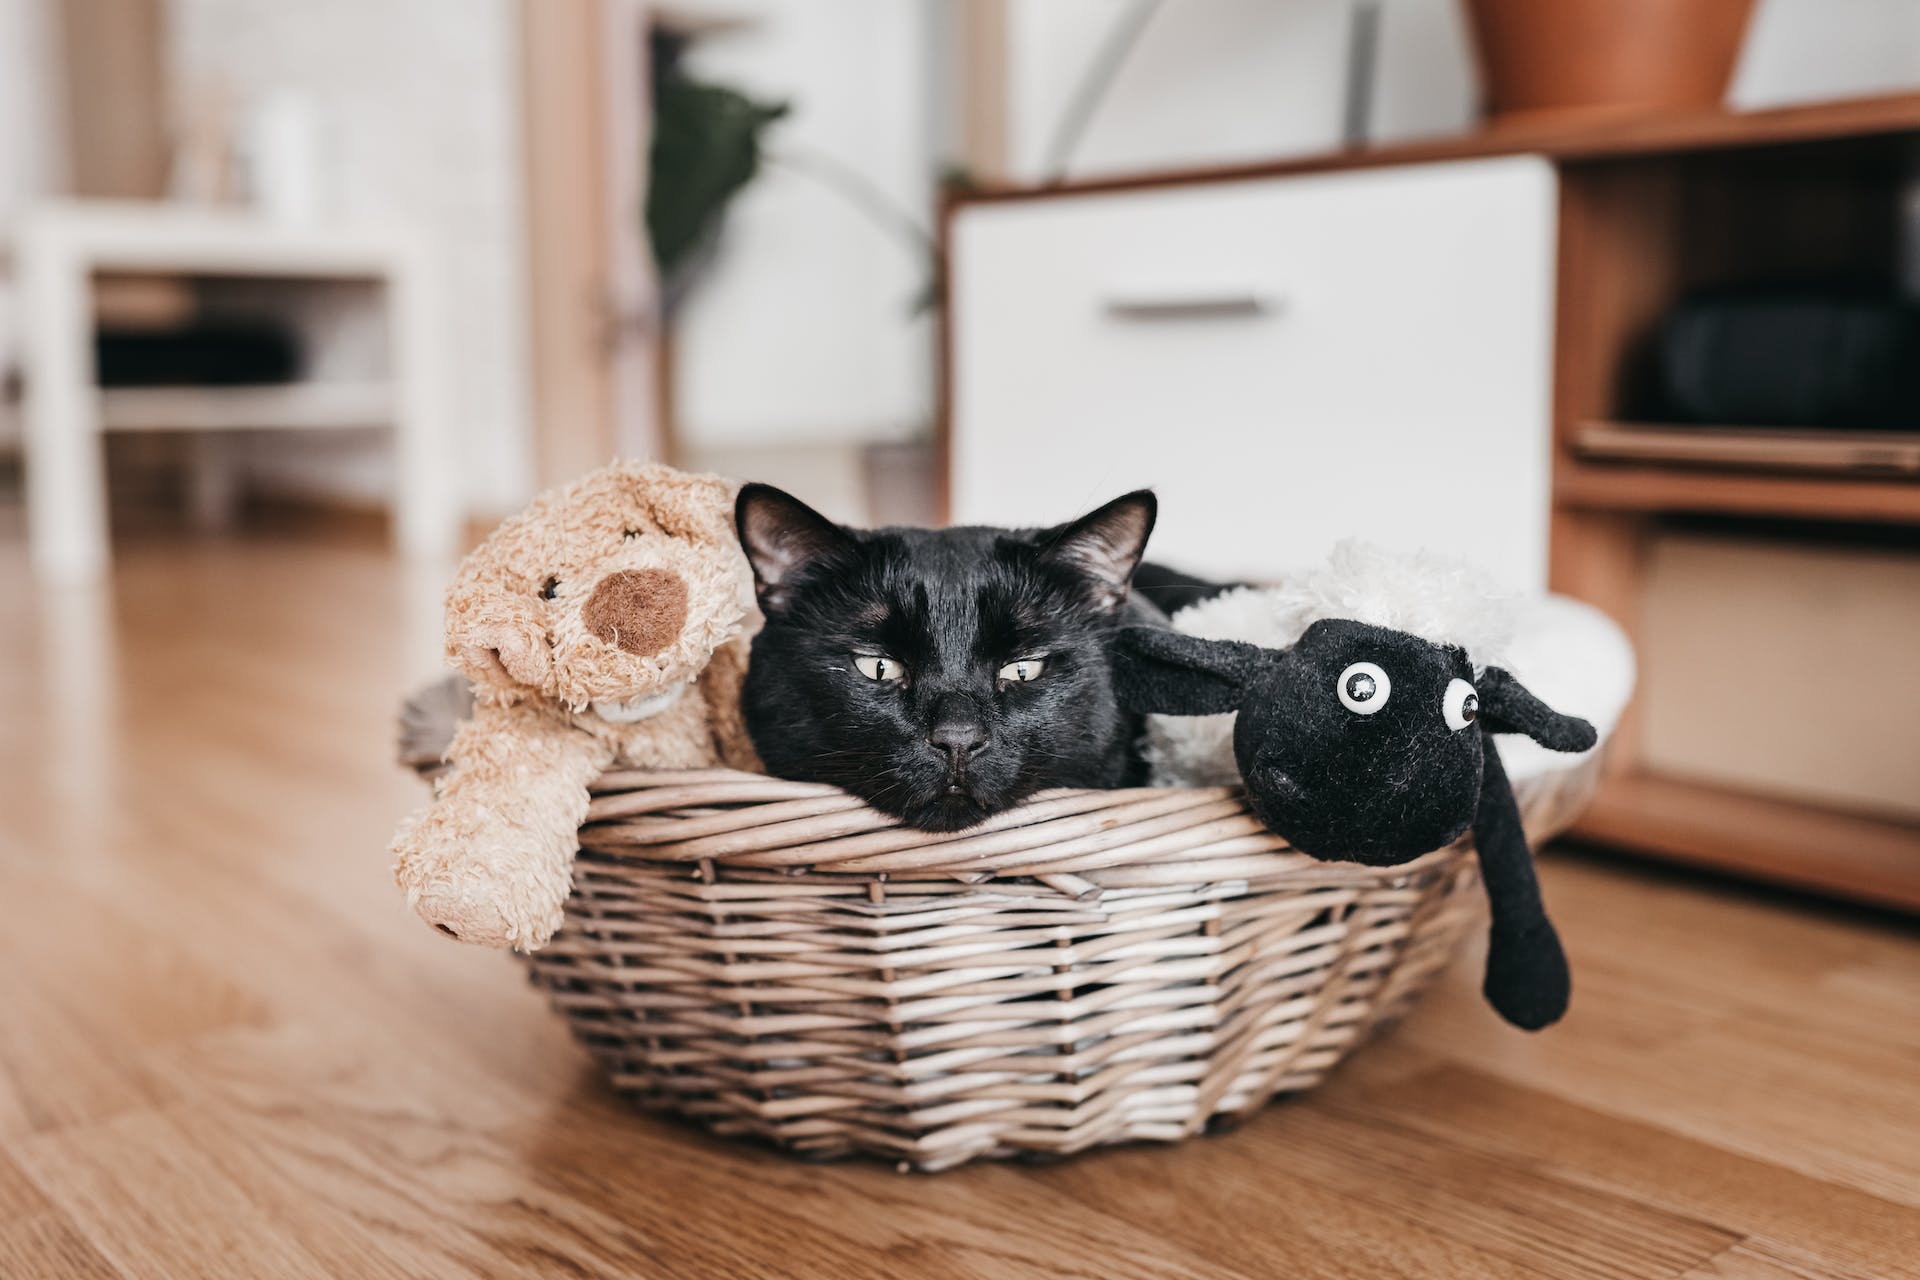 A cat sitting in a basket with some stuffed toys